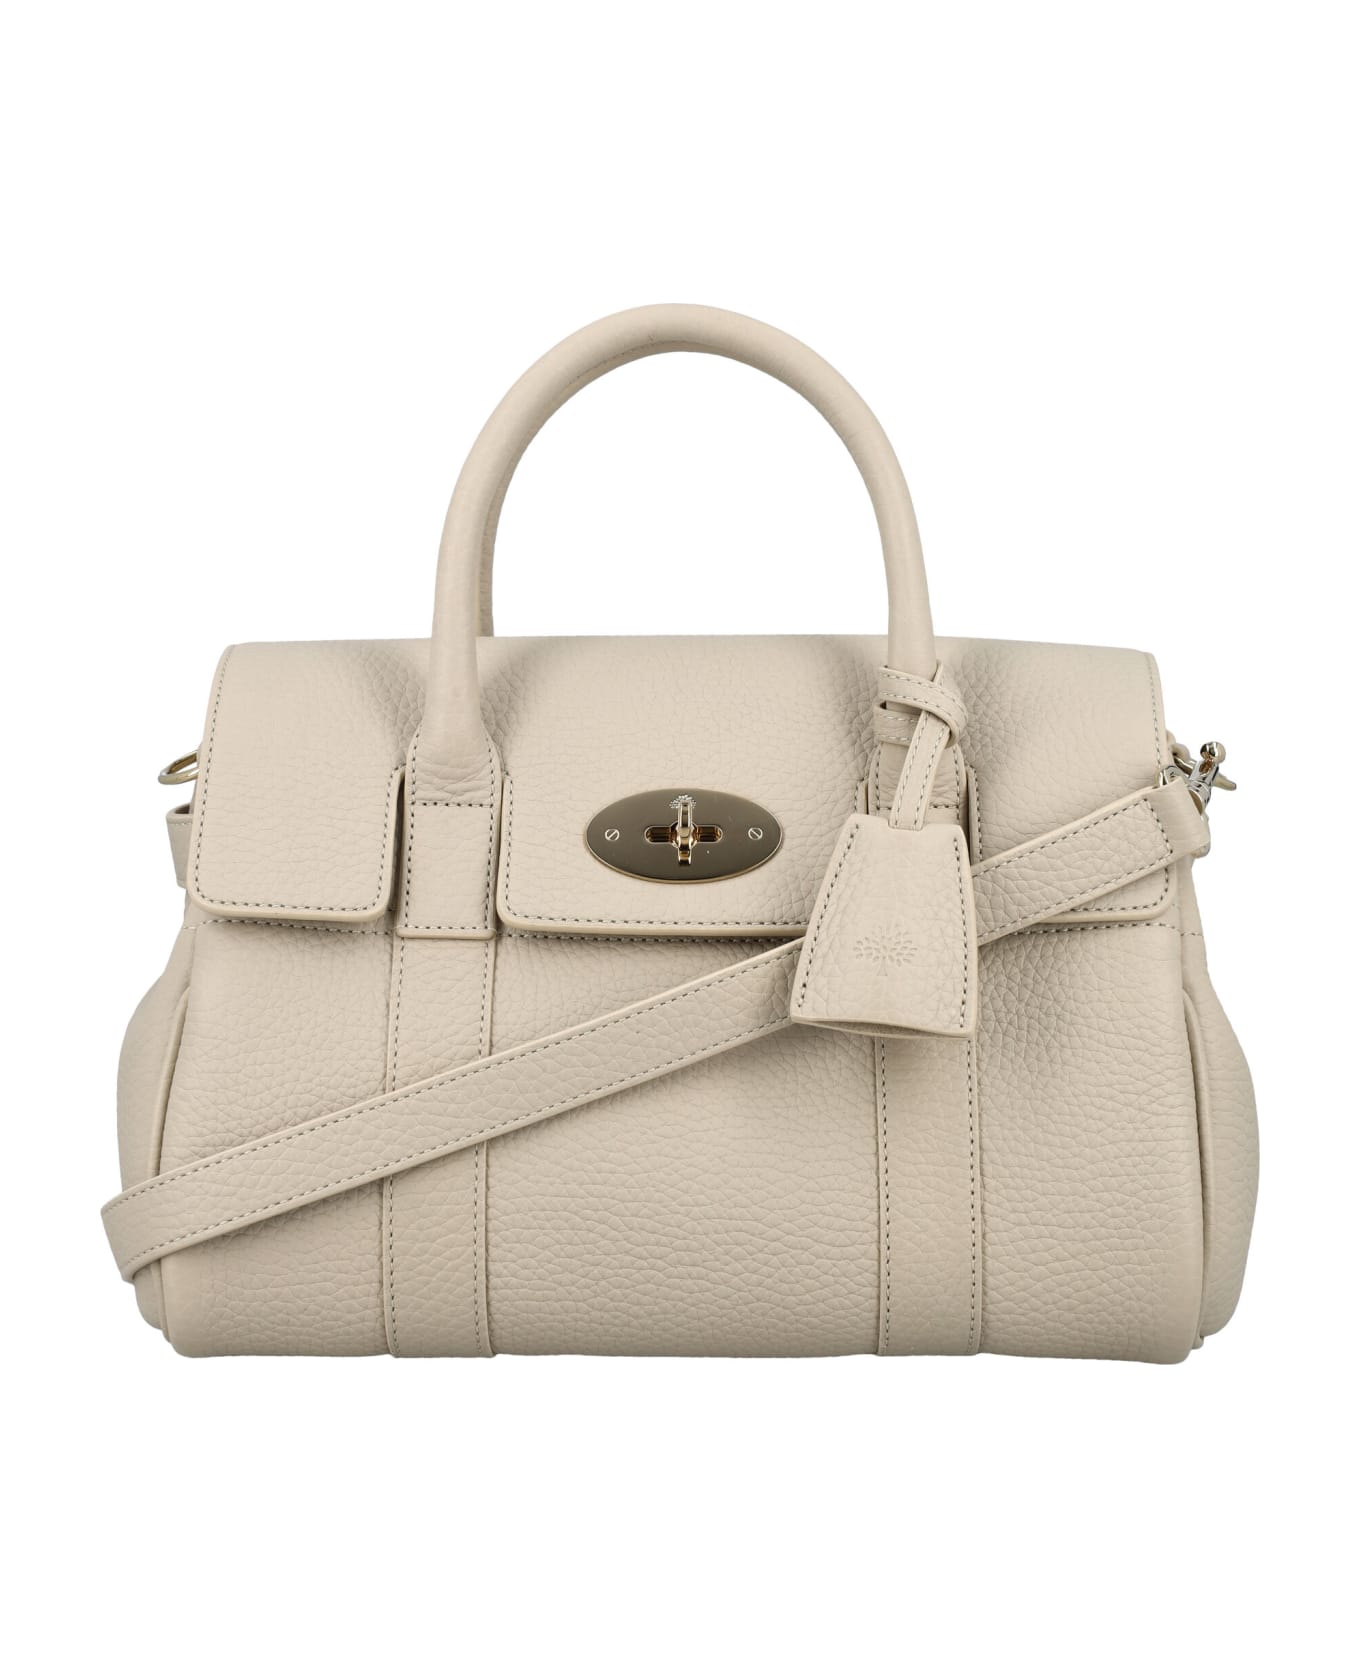 Mulberry Small Bayswater Satchel Hg - CHALK トートバッグ